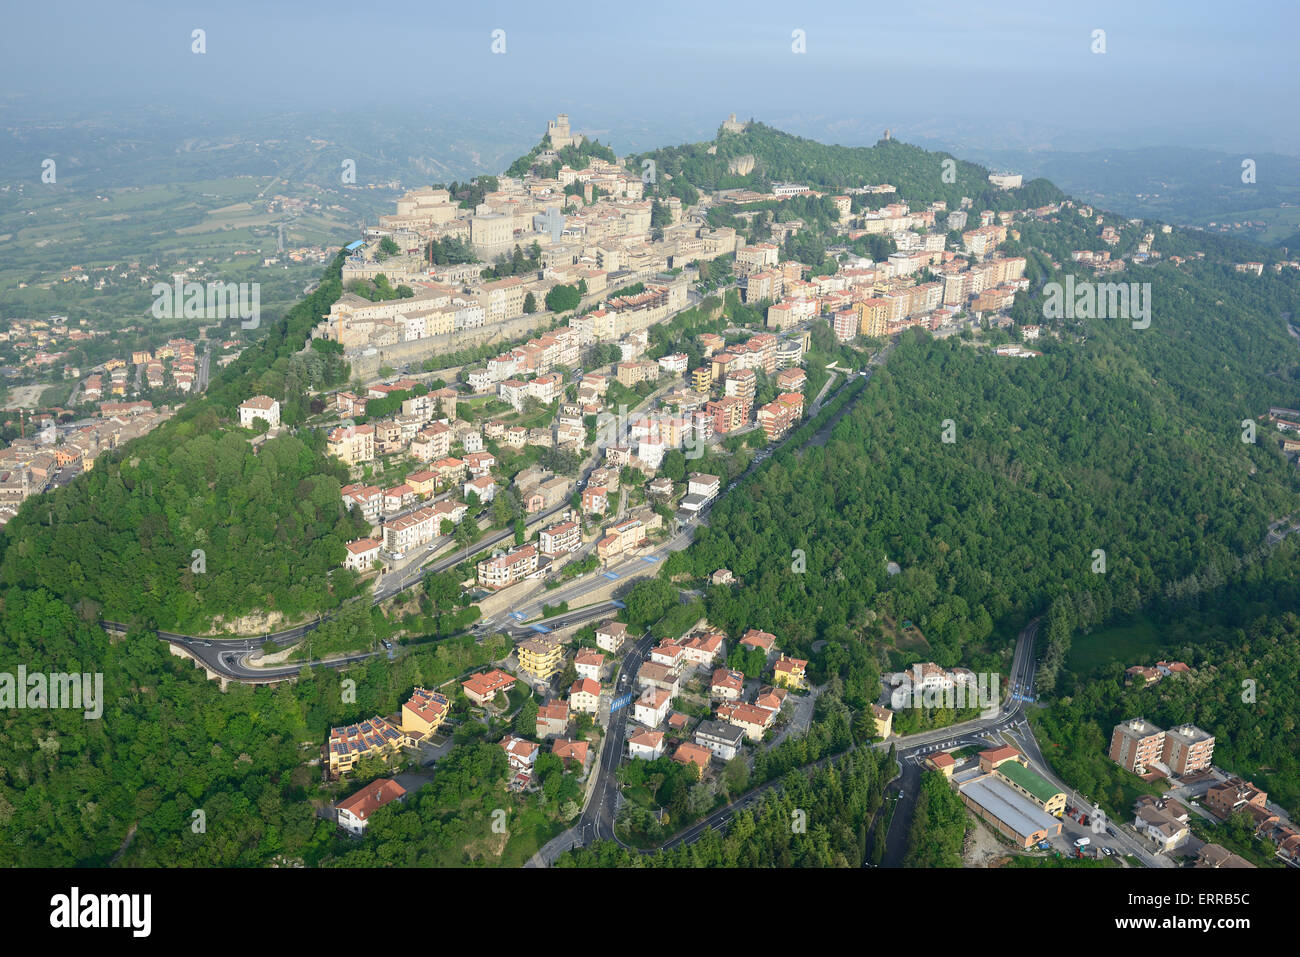 AERIAL VIEW. The capital city of San Marino on the western side of Mount Titano. Republic of San Marino. Stock Photo